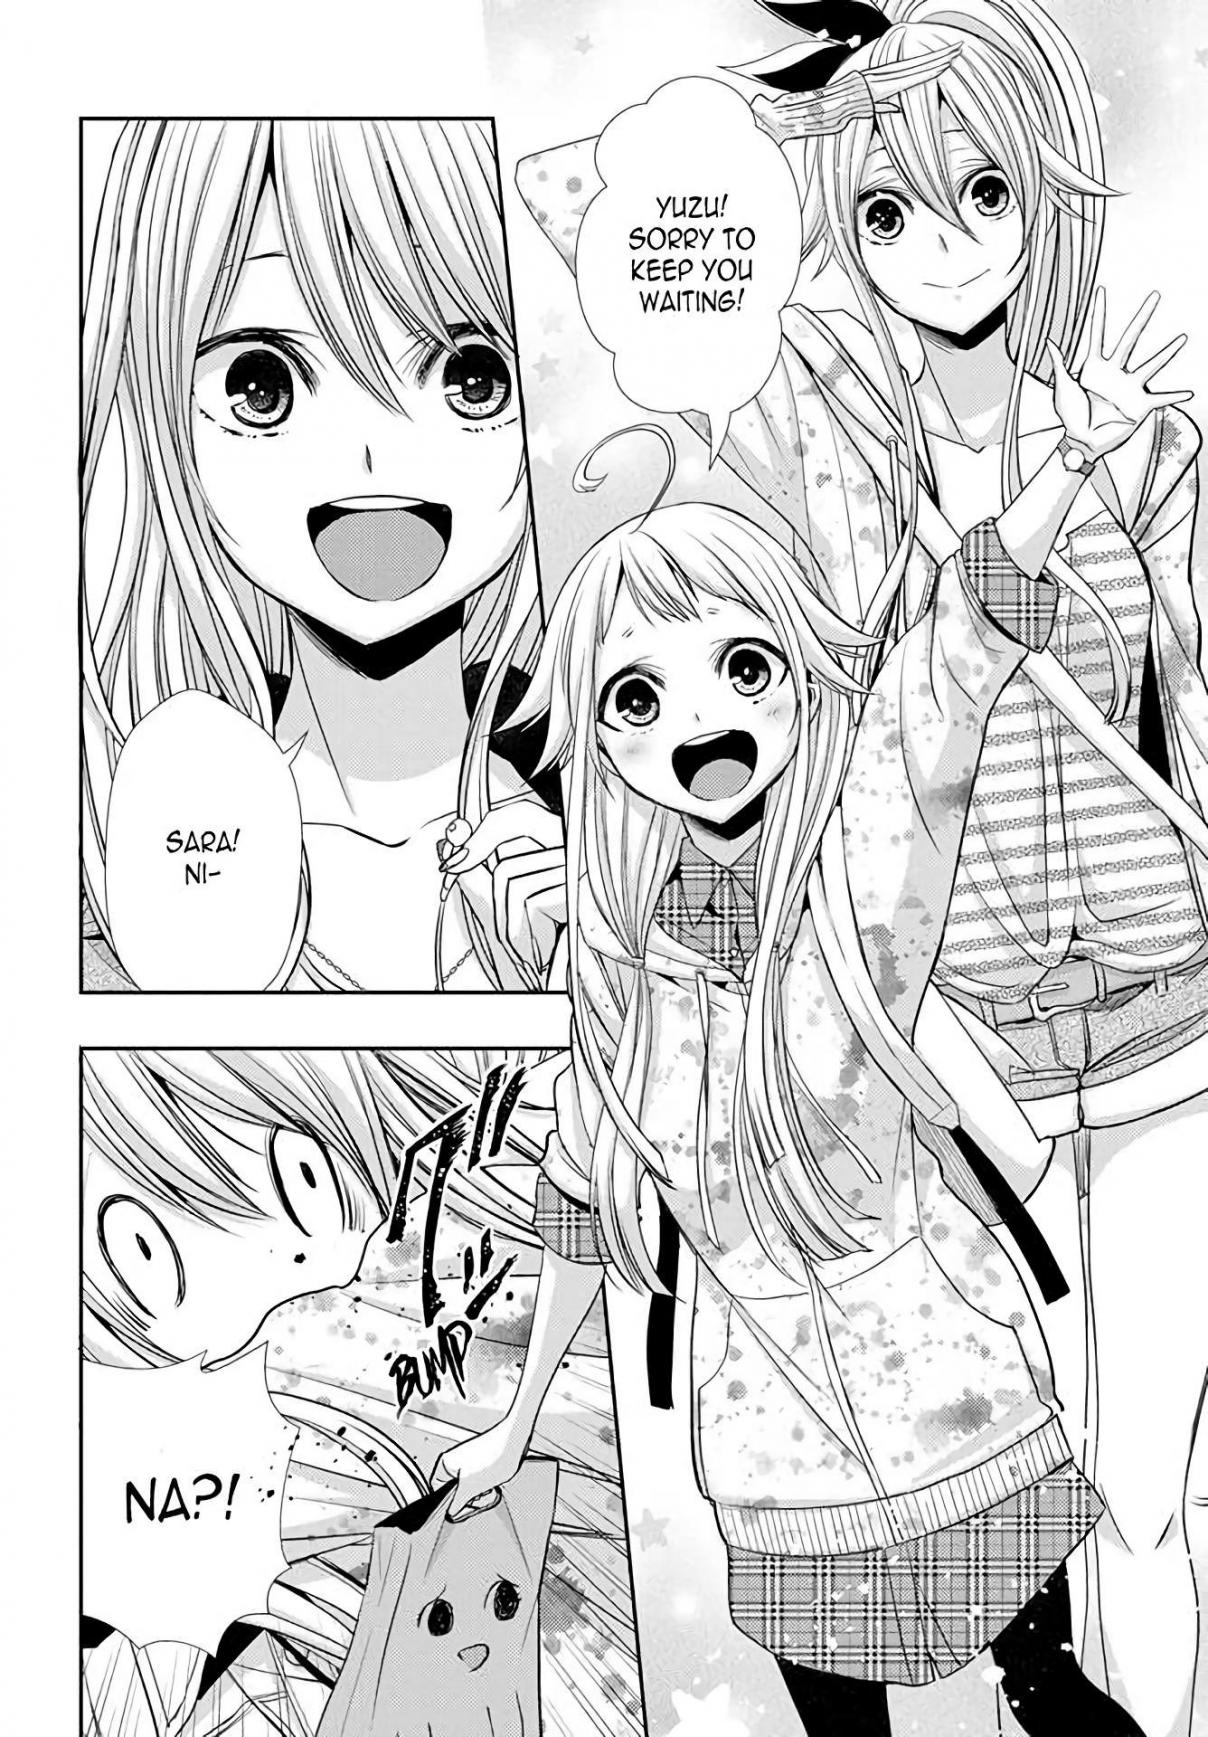 Citrus Vol. 10 Ch. 38 In Love Because